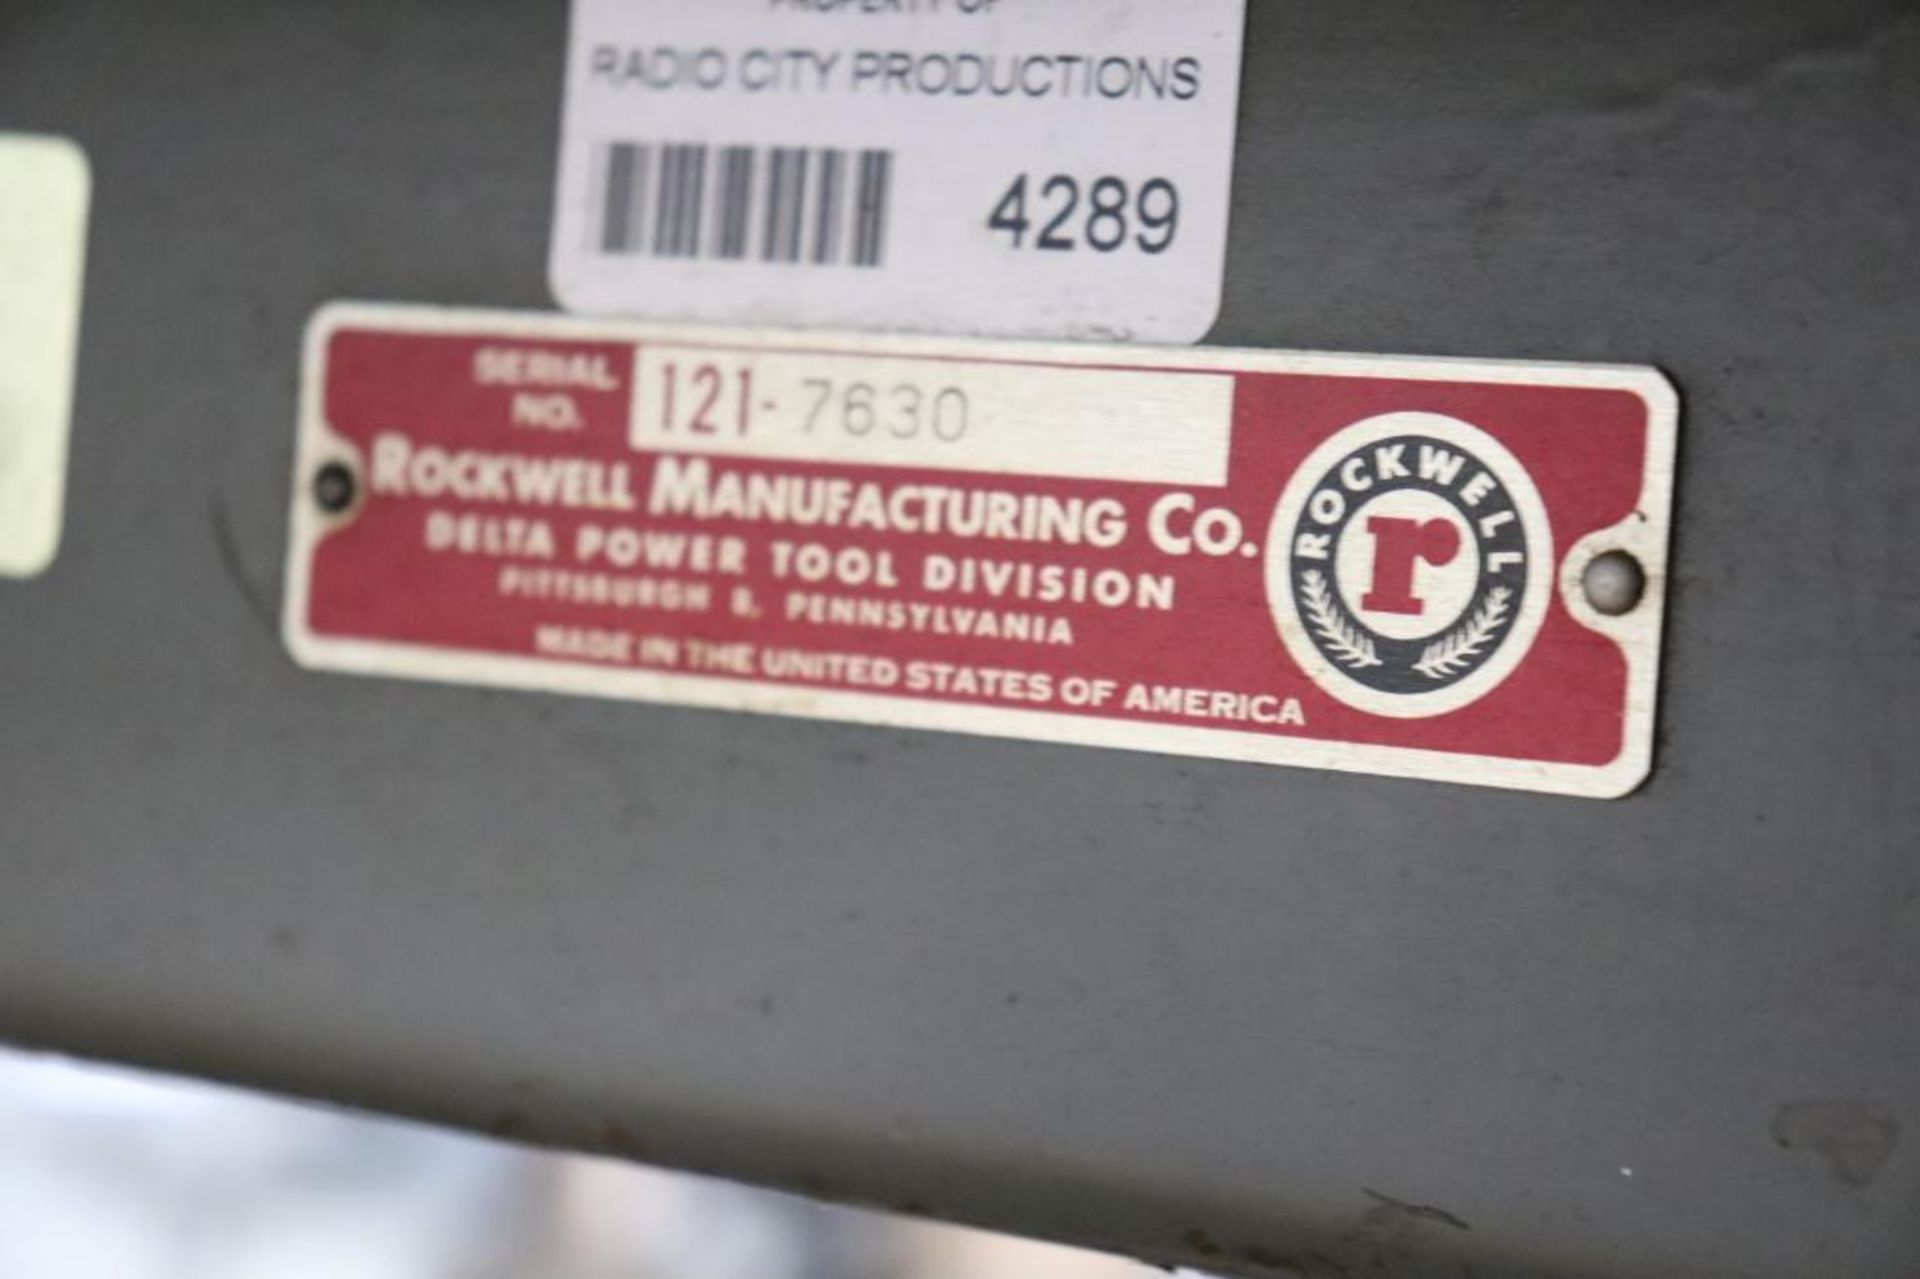 Rockwell 121-7630 20" vertical bandsaw - Image 3 of 5